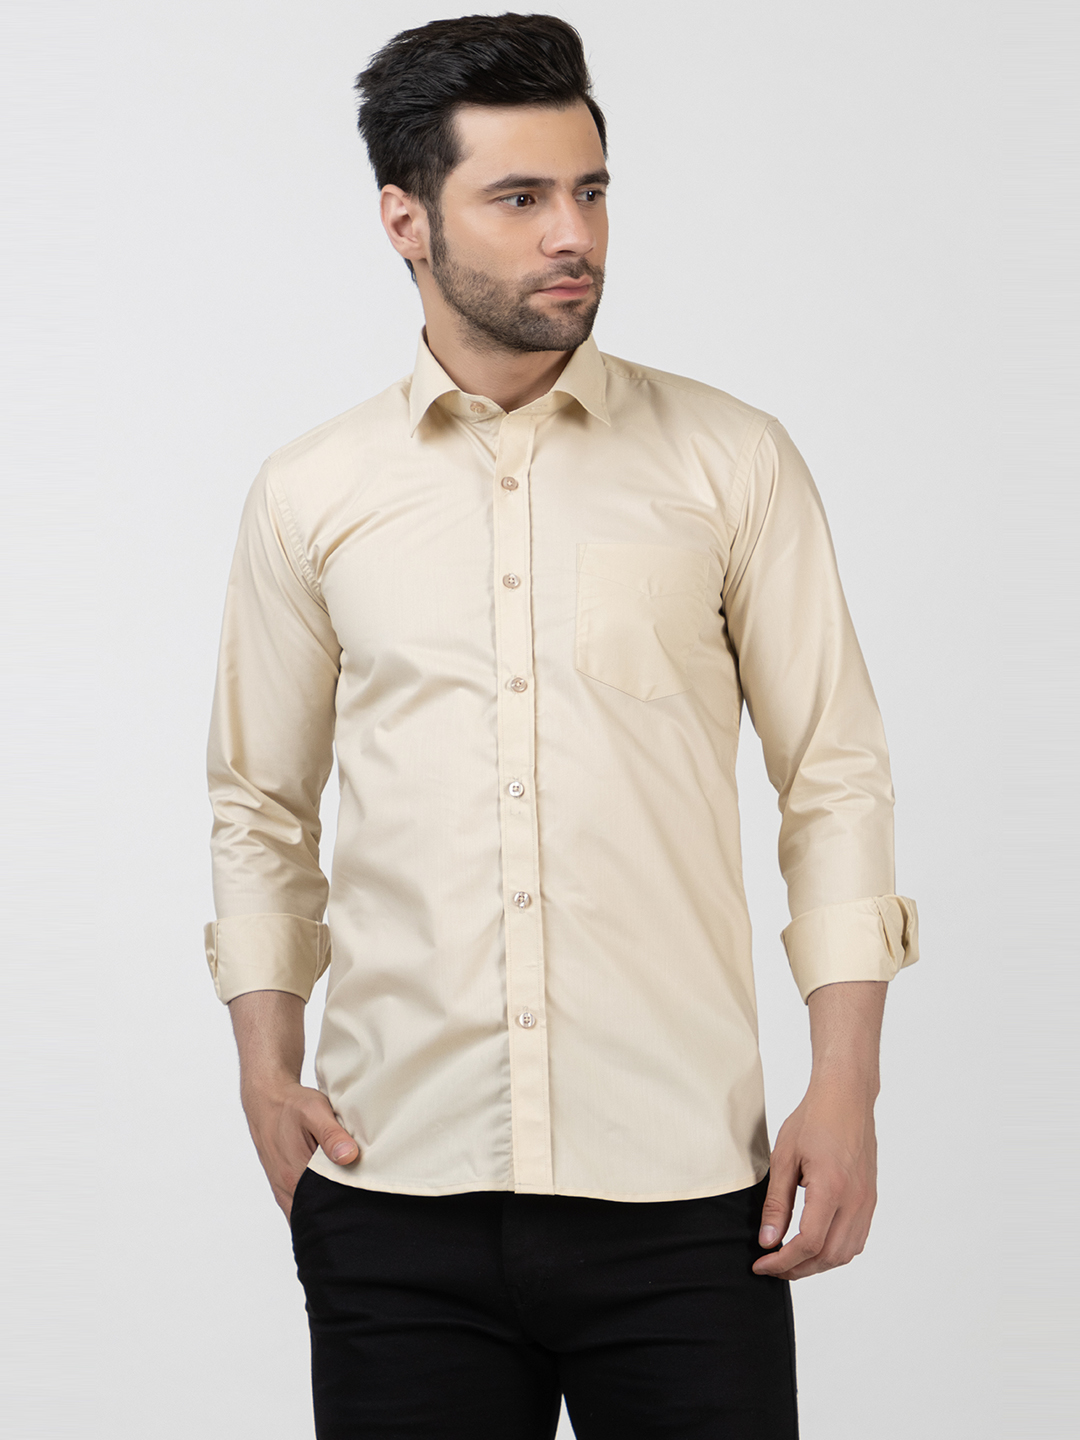 Buy Cream Shirt for Men Online In India - ExperianceClothing